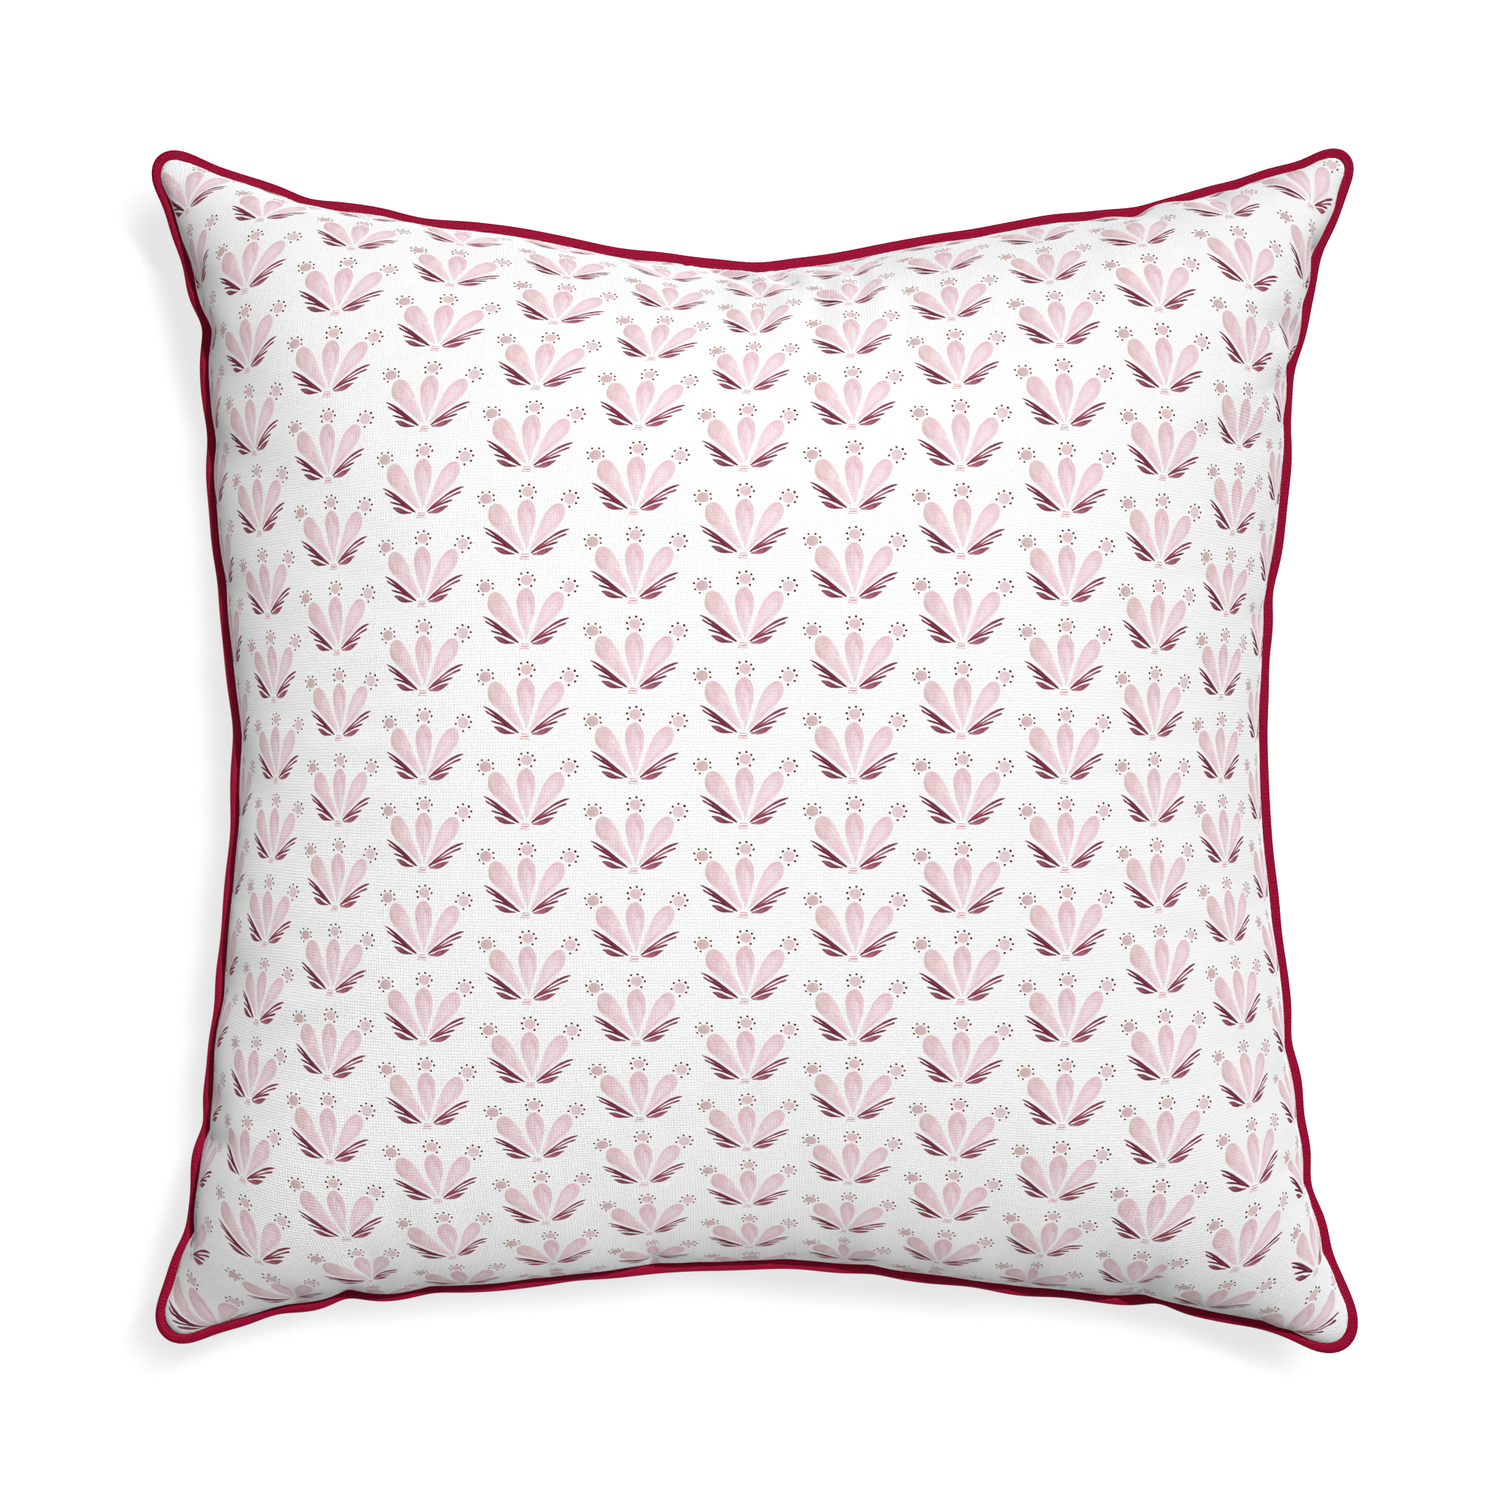 Euro-sham serena pink custom pillow with raspberry piping on white background